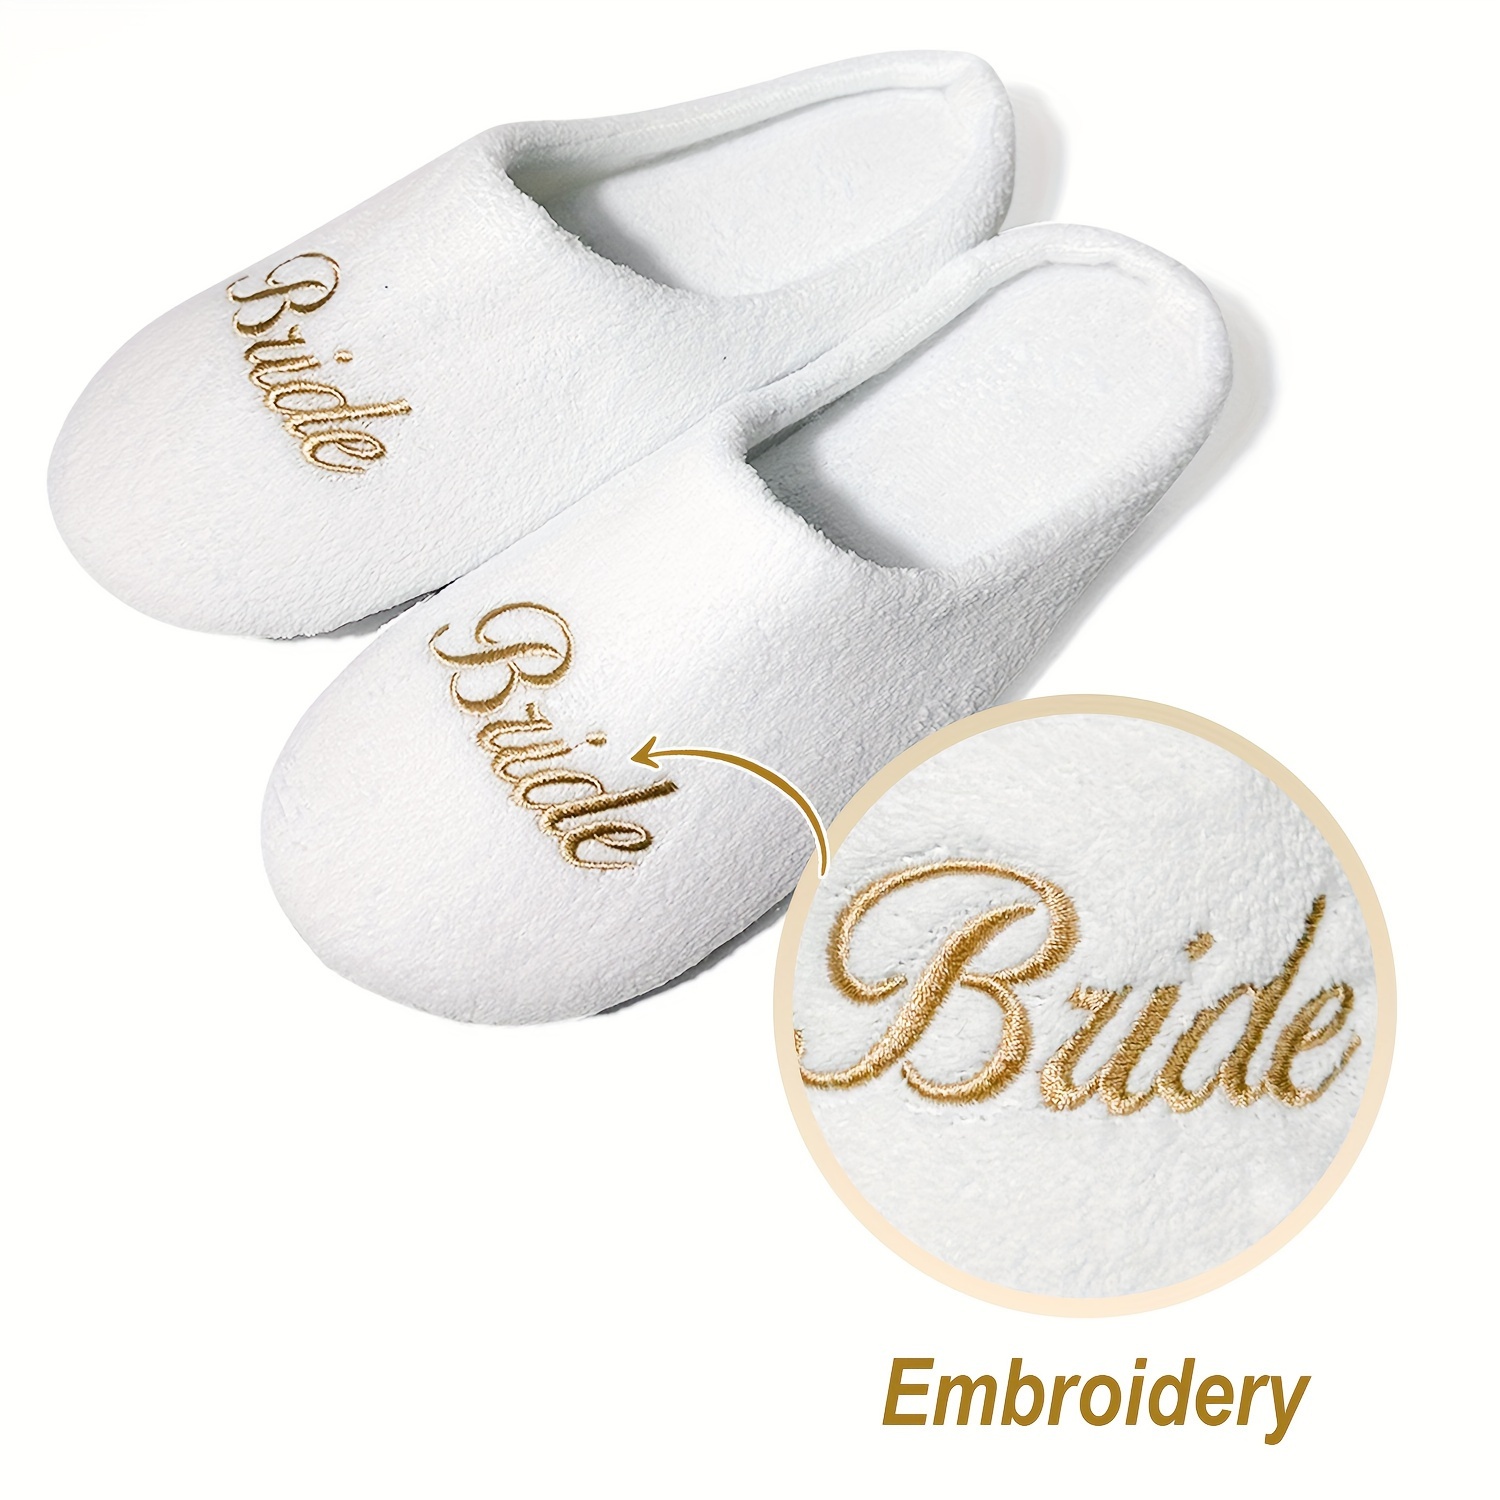 

Bridal Party Slippers For Women, Fuzzy Soft Plush Lined Comfy Closed Toe Slip-on Flats, Embroidered Golden "bride" Lettering, Ideal For Wedding